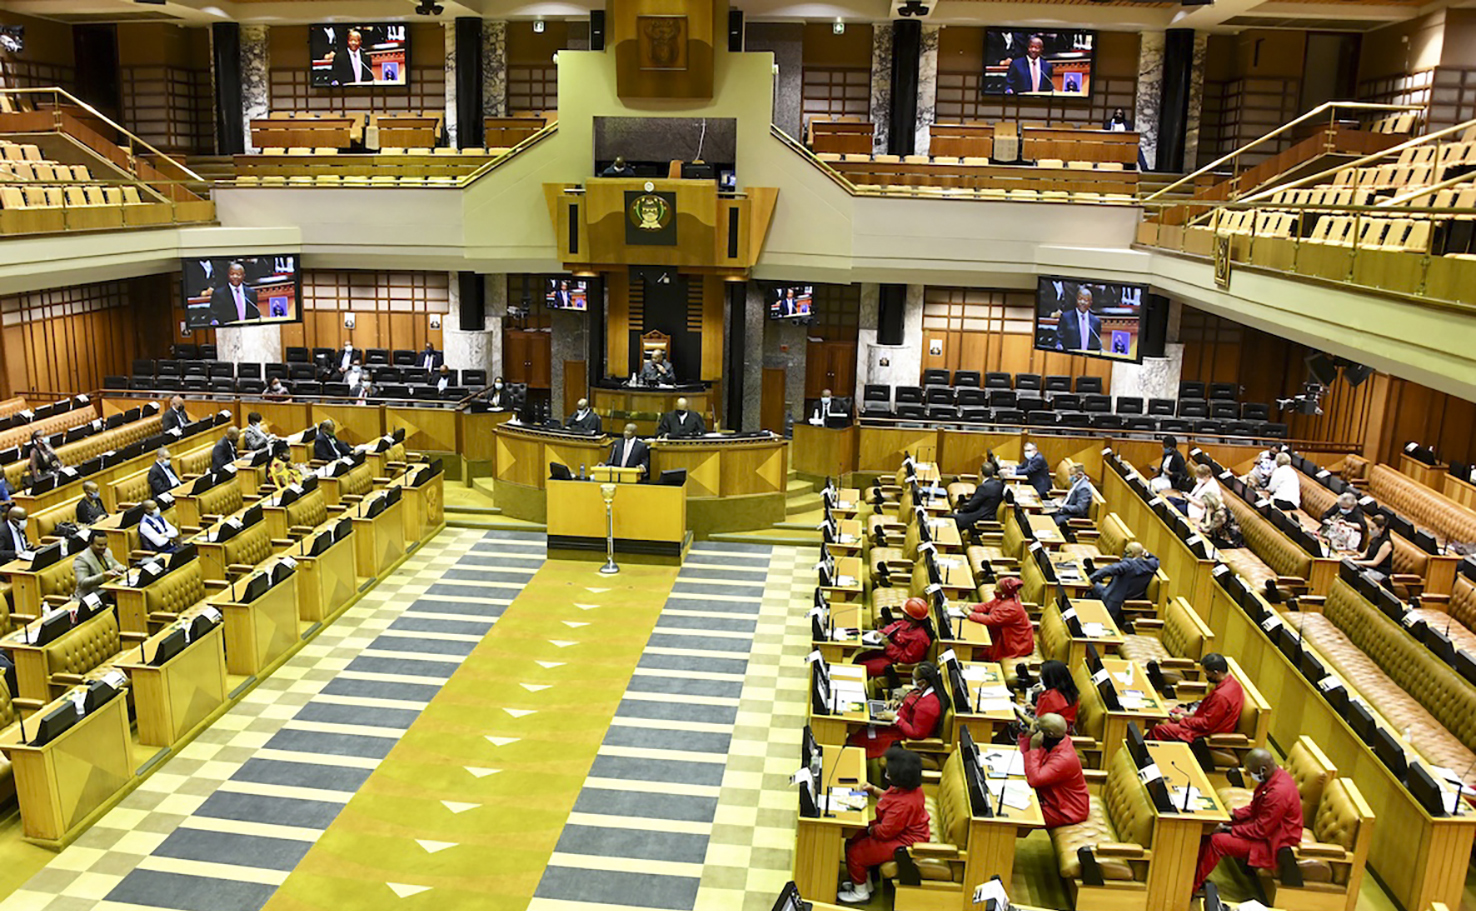 An image of the National Assembly in session